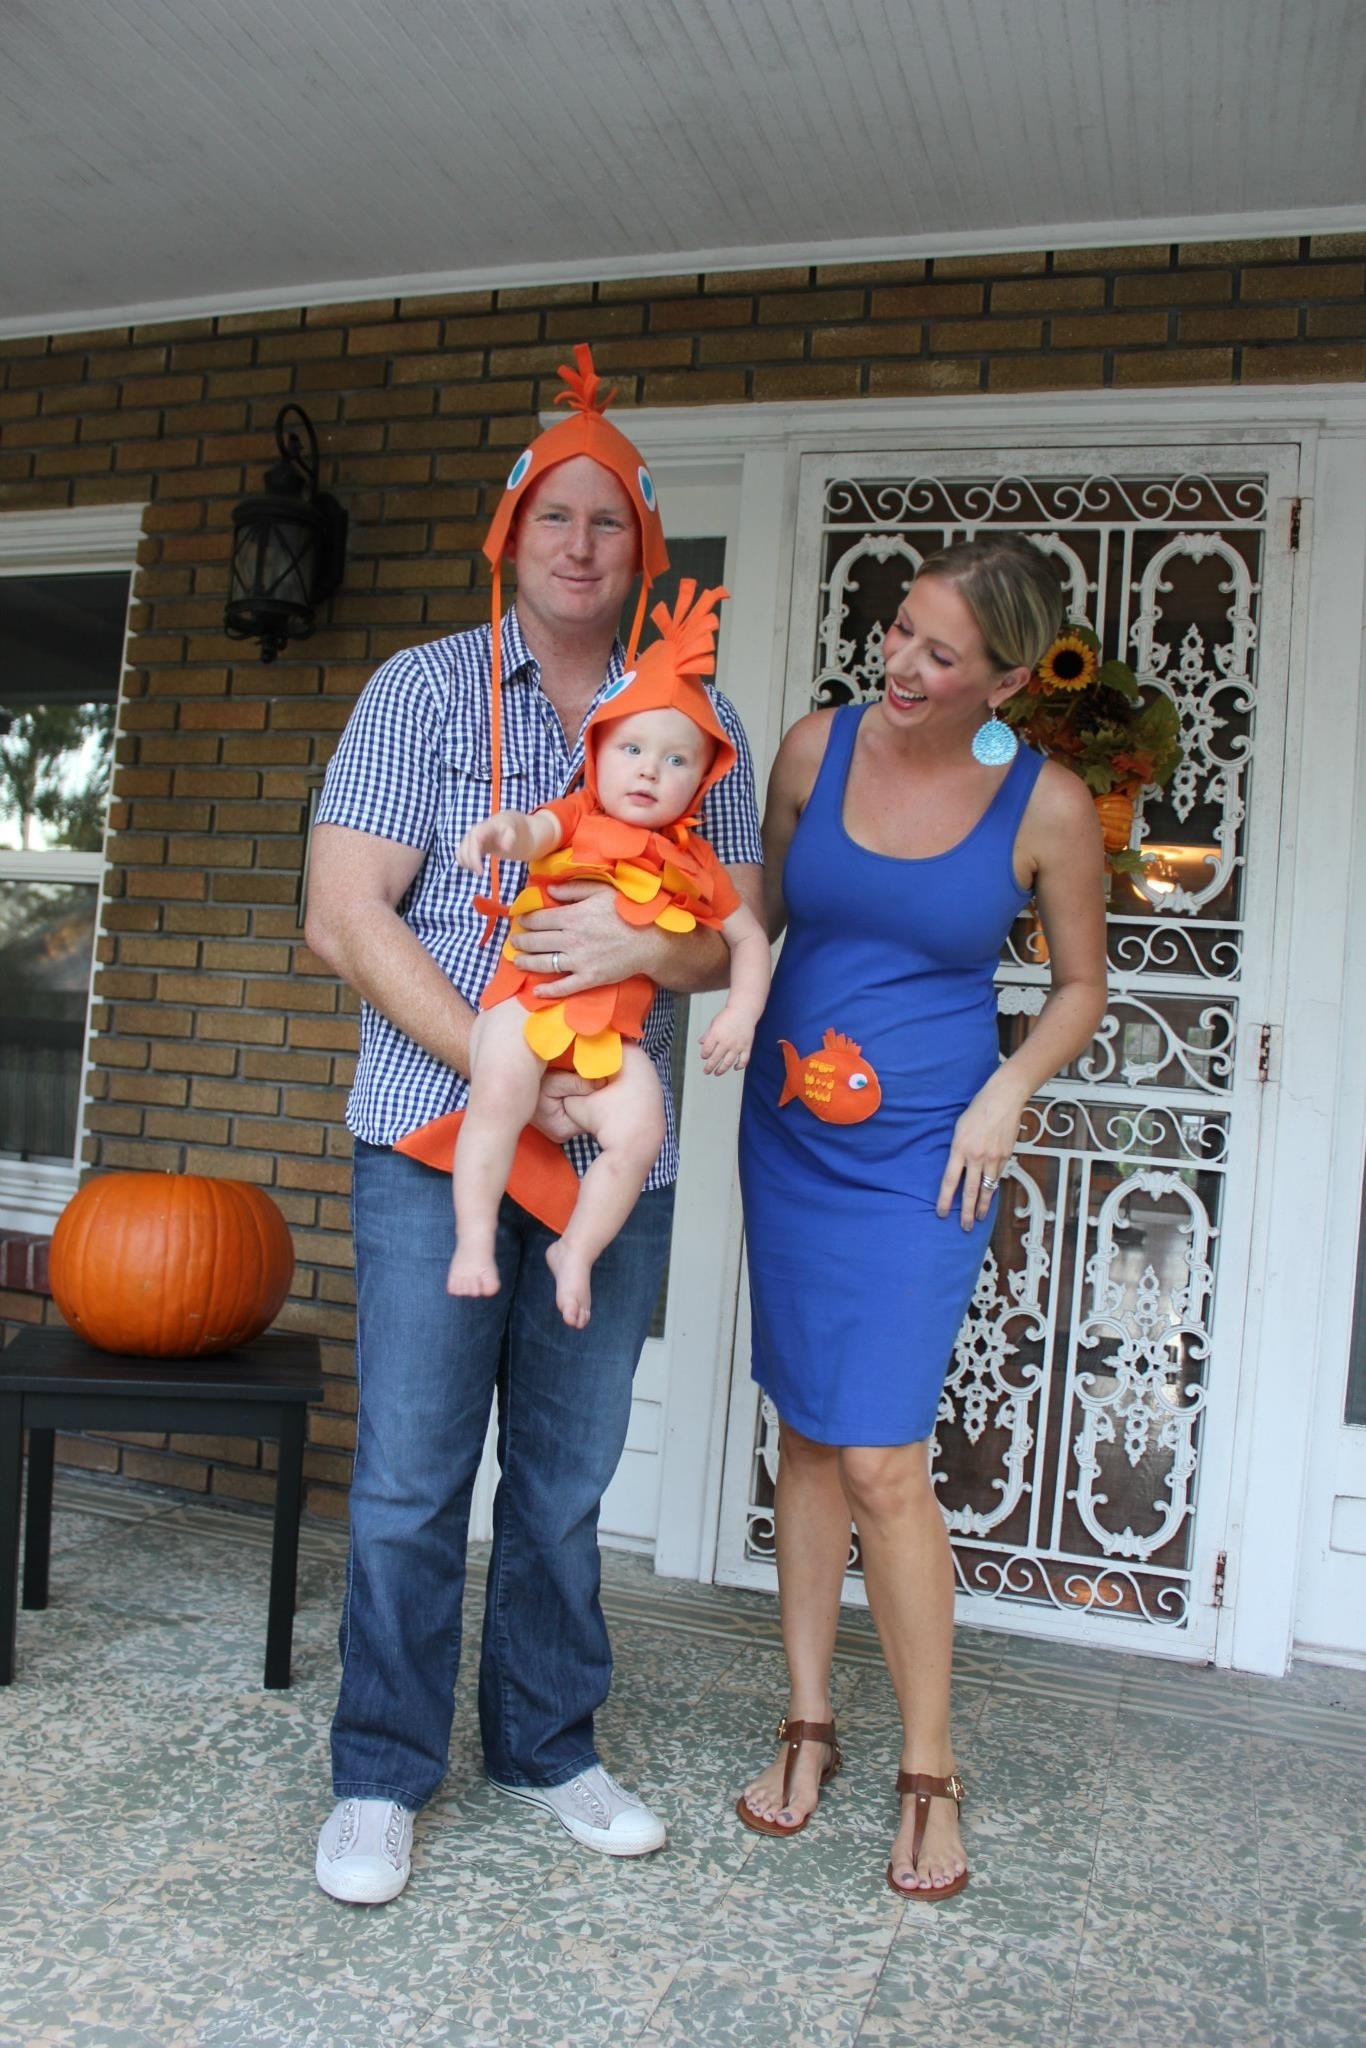 10 Stylish Family Of 4 Halloween Costume Ideas diy fish costume for the family no sewing 7 2022